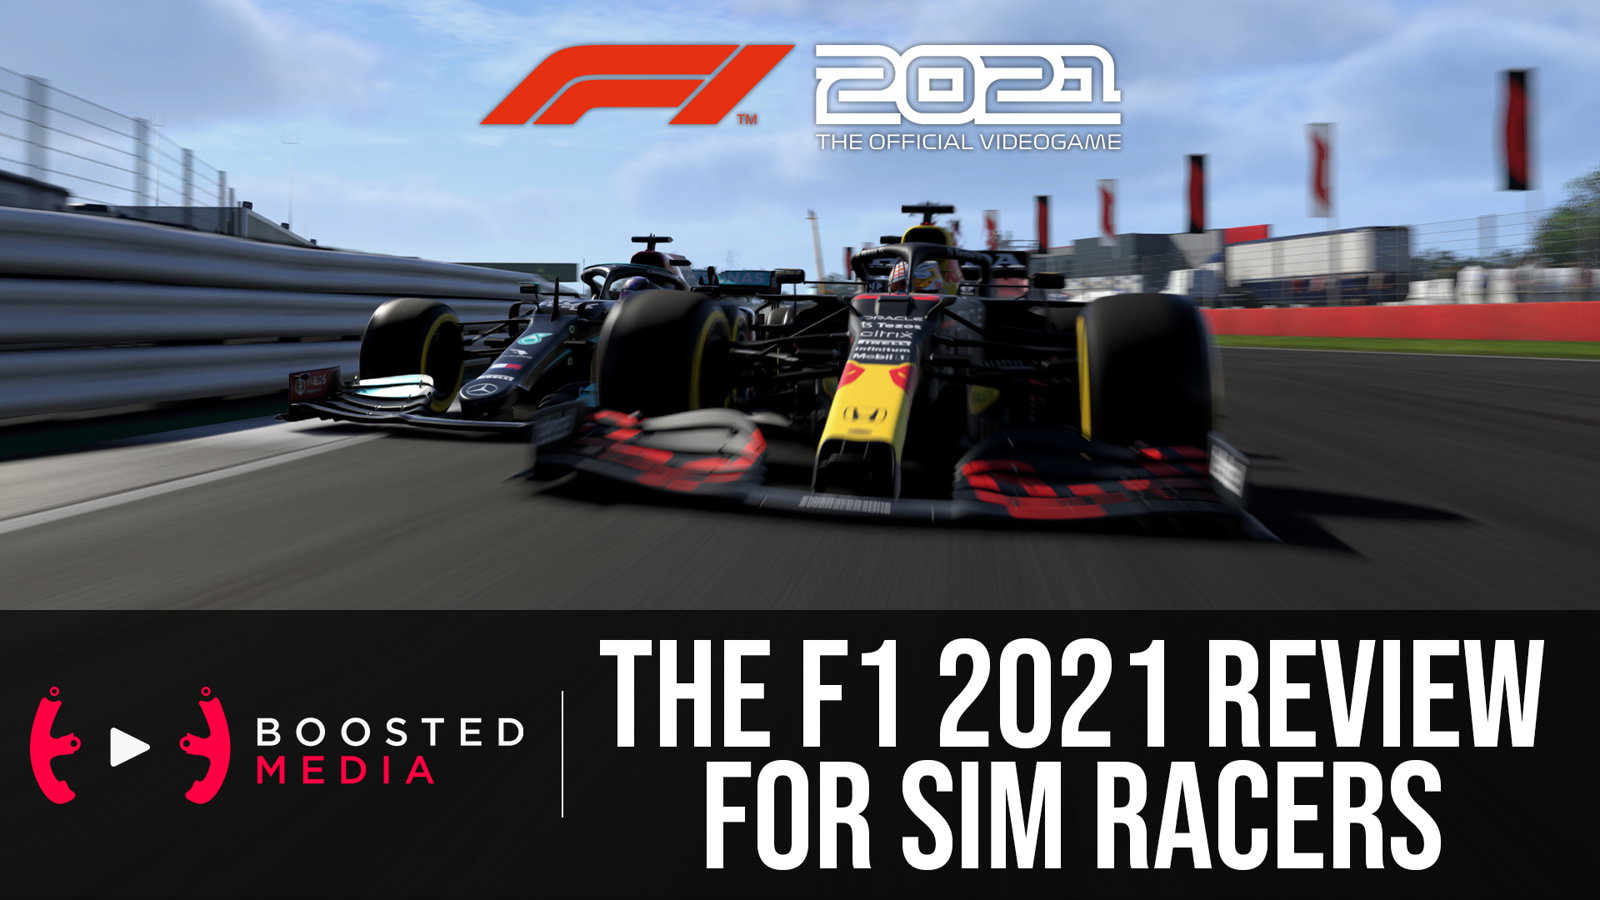 The F1 2021 Review FOR SIM RACERS - Boosted Media